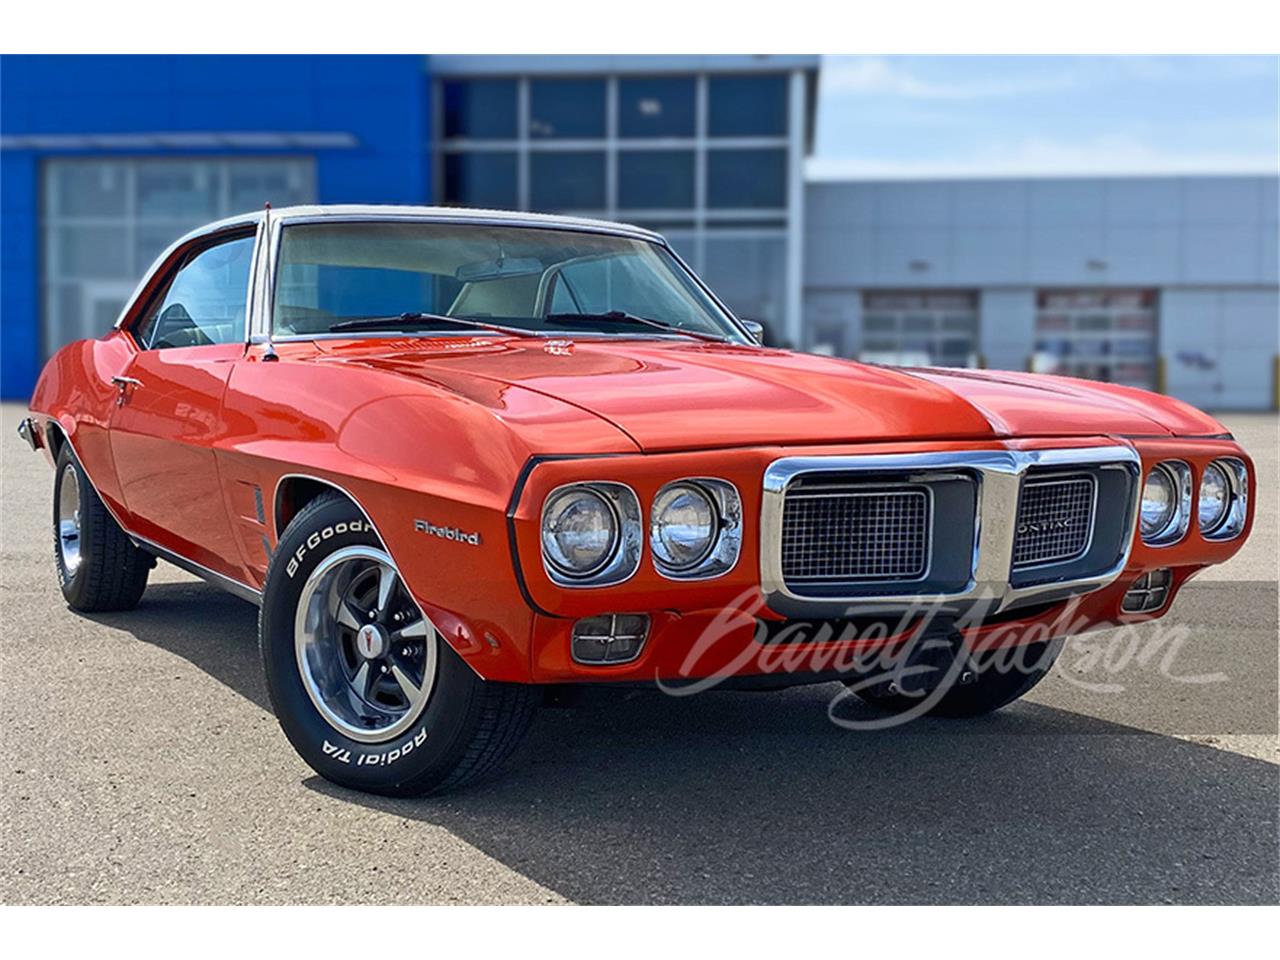 For Sale at Auction: 1969 Pontiac Firebird in Scottsdale, Arizona for sale in Scottsdale, AZ